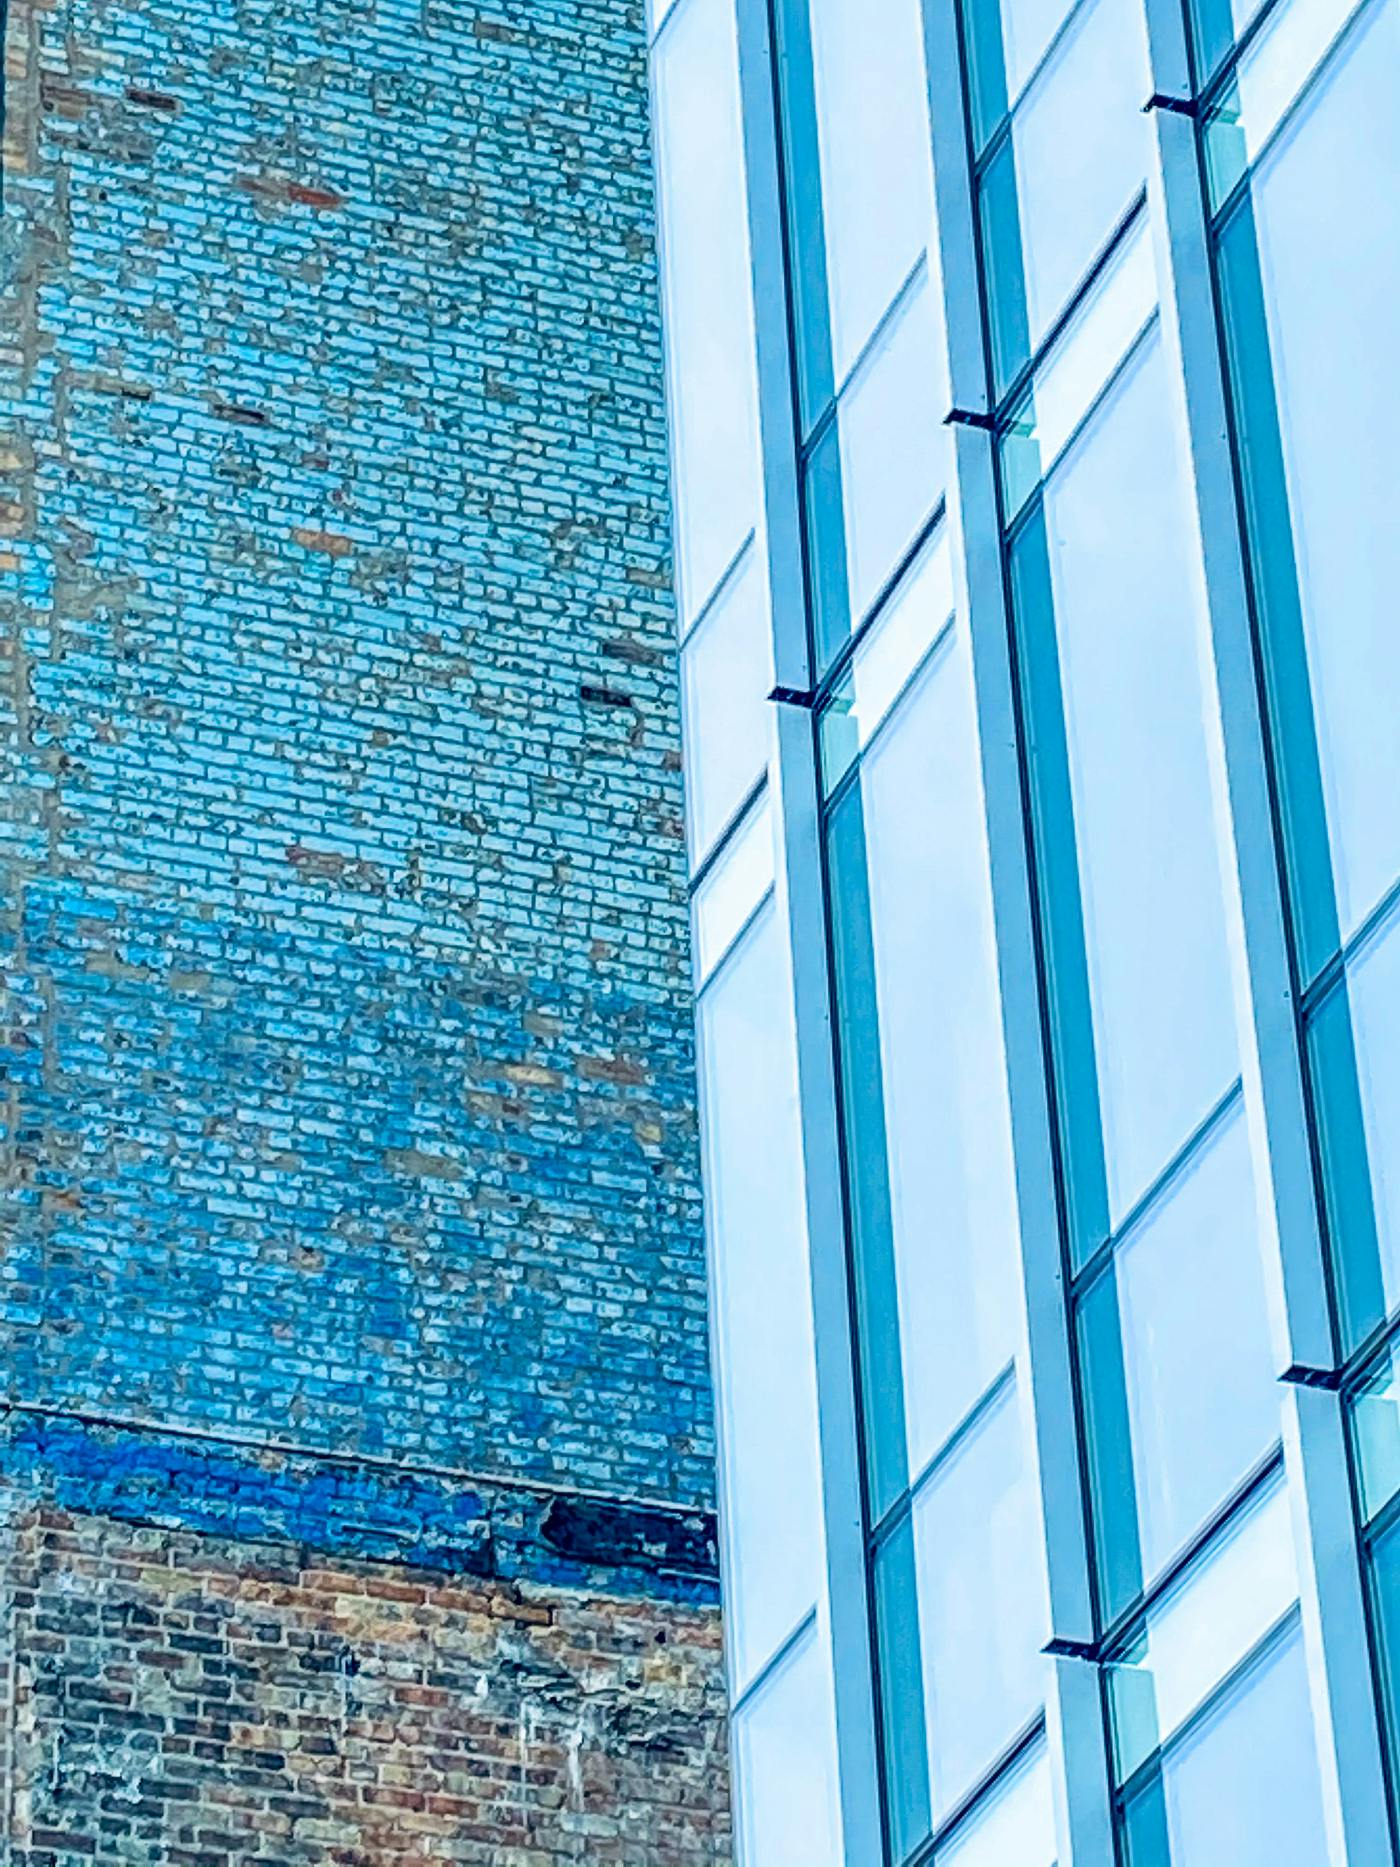 Two buildings at right angles, one brick paitned blue the other modern steel and glass reflecting blue